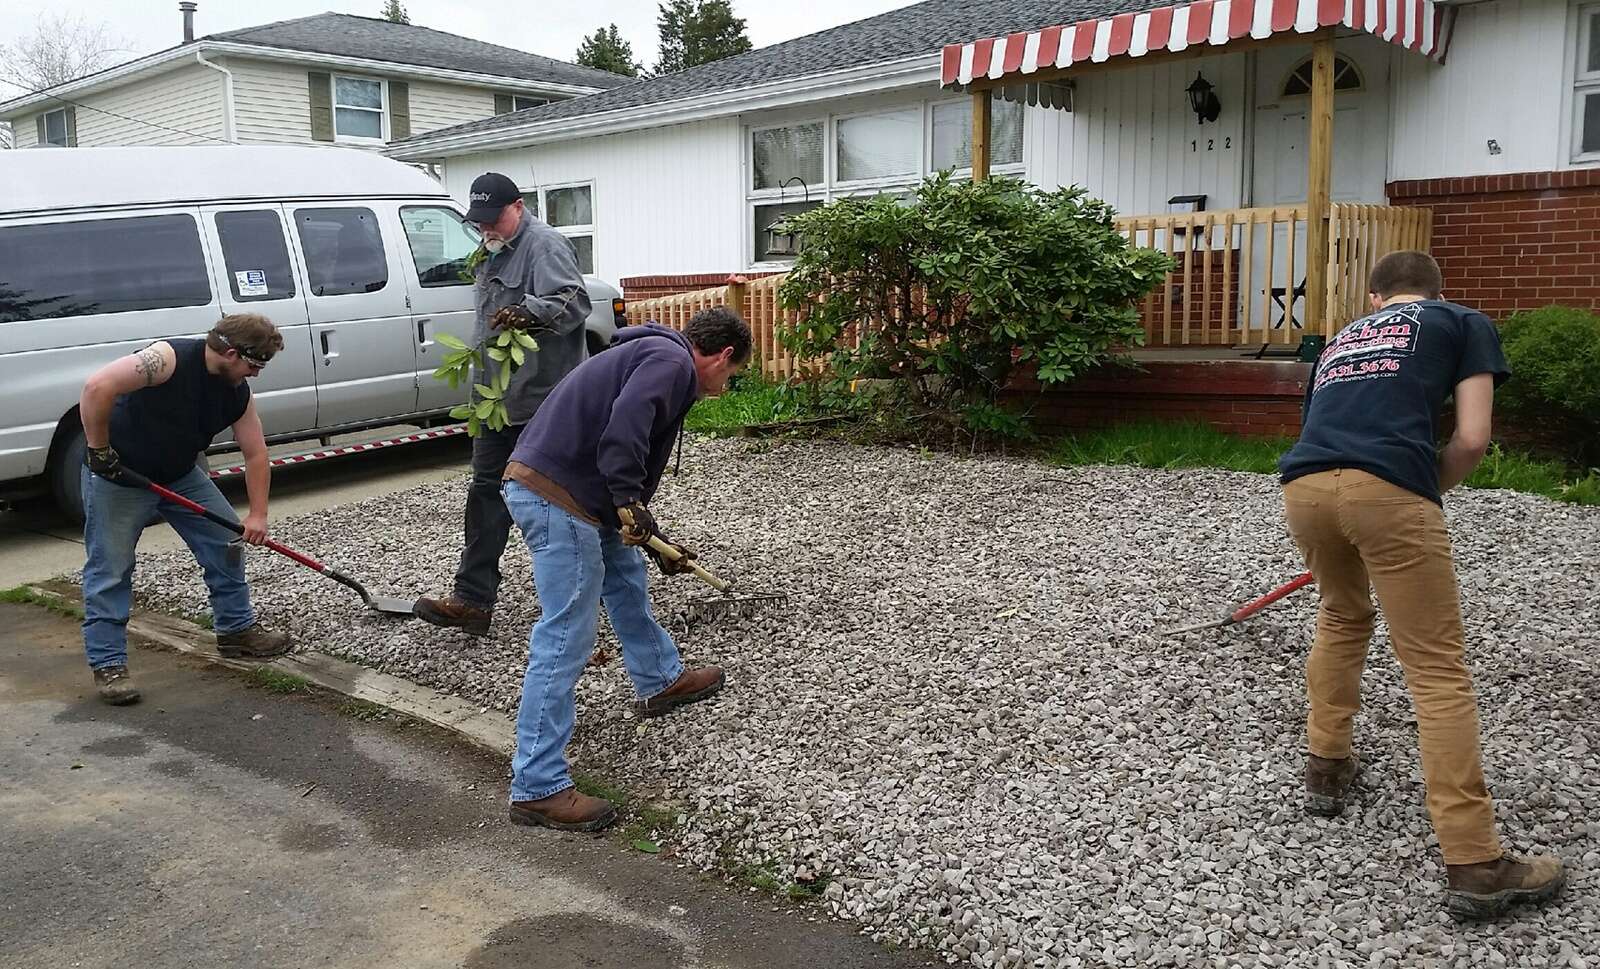 Volunteers work to beautify a community group home